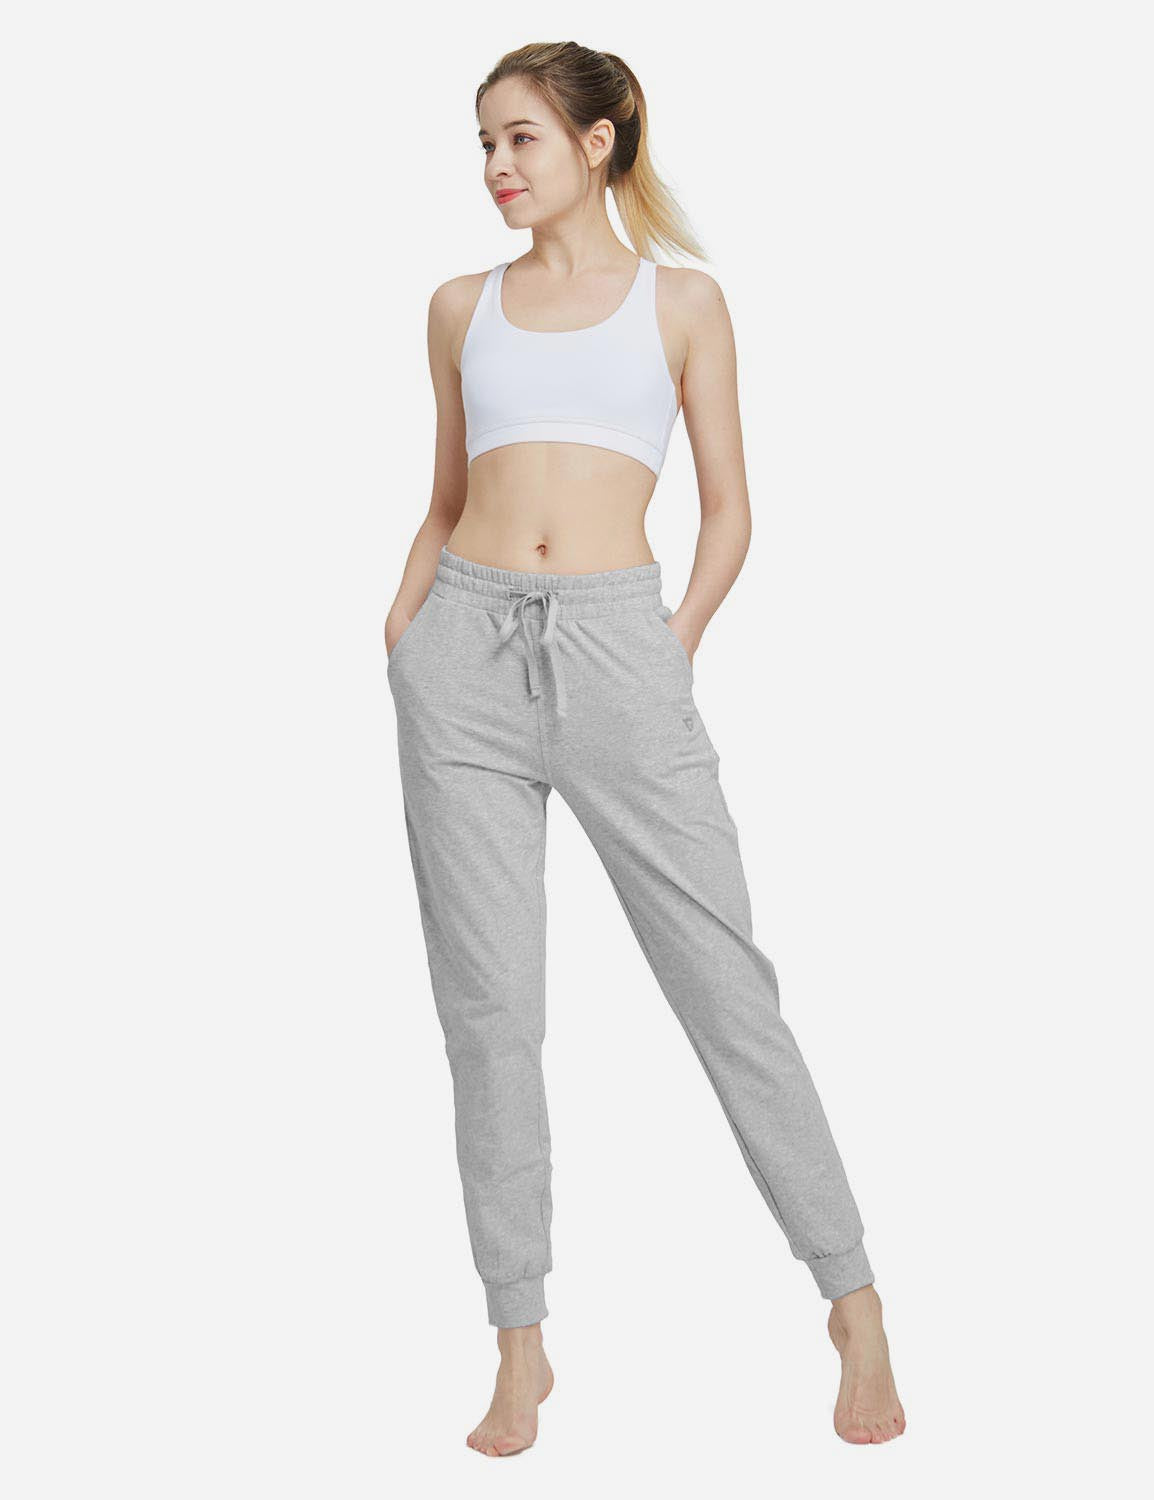 Baleaf Women's Cotton Comfy Pocketed & Tapered Weekend Joggers abh103 Light Gray Full